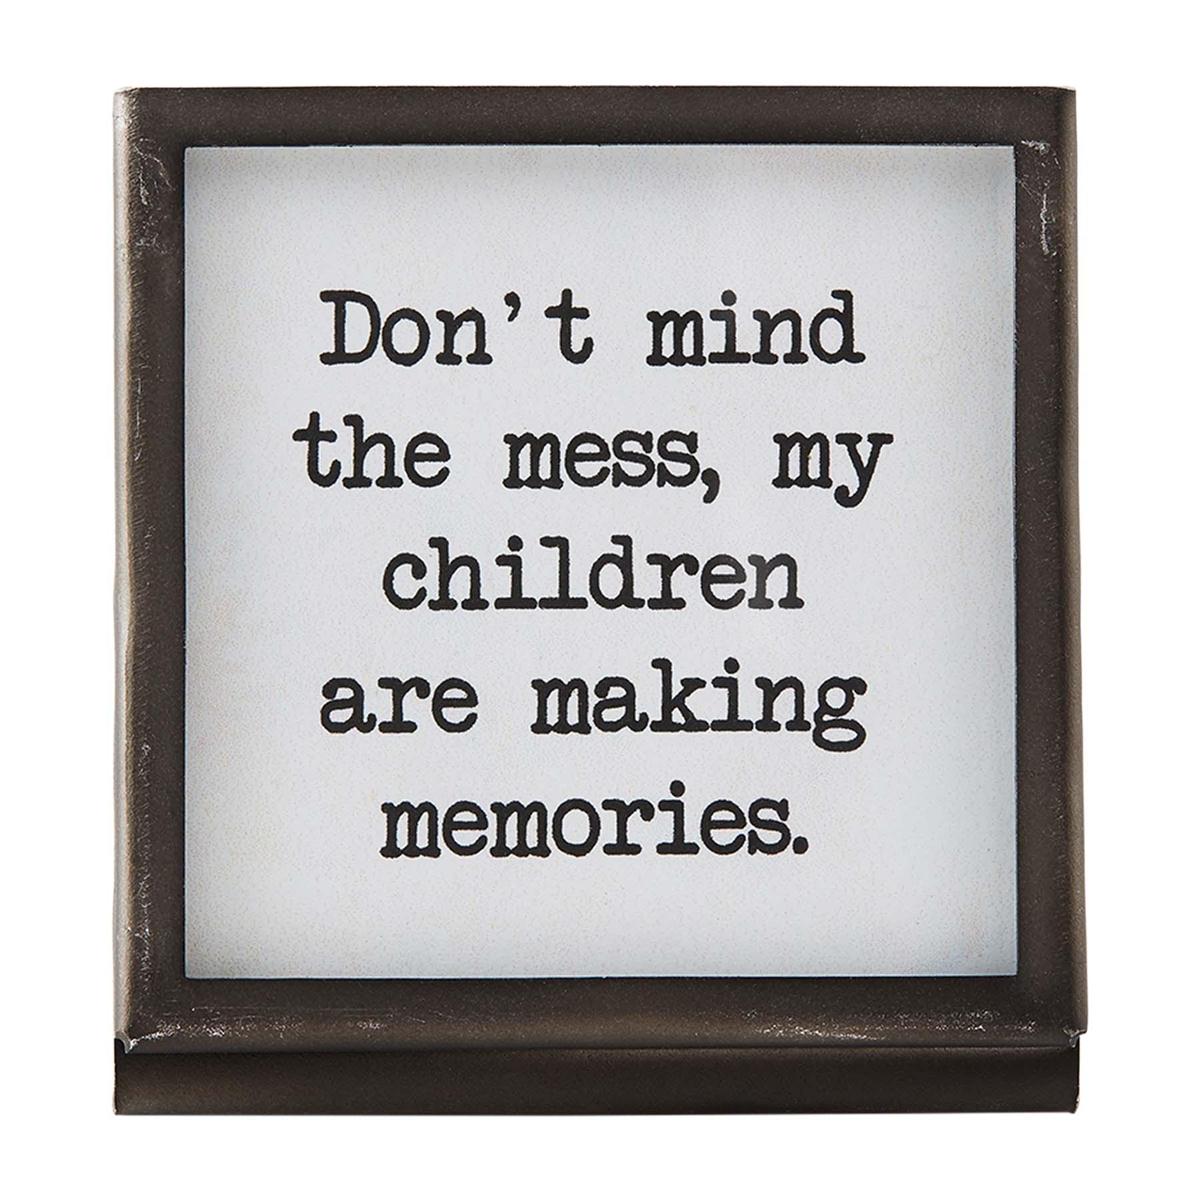 mind the mess black metal framed saying on a white background